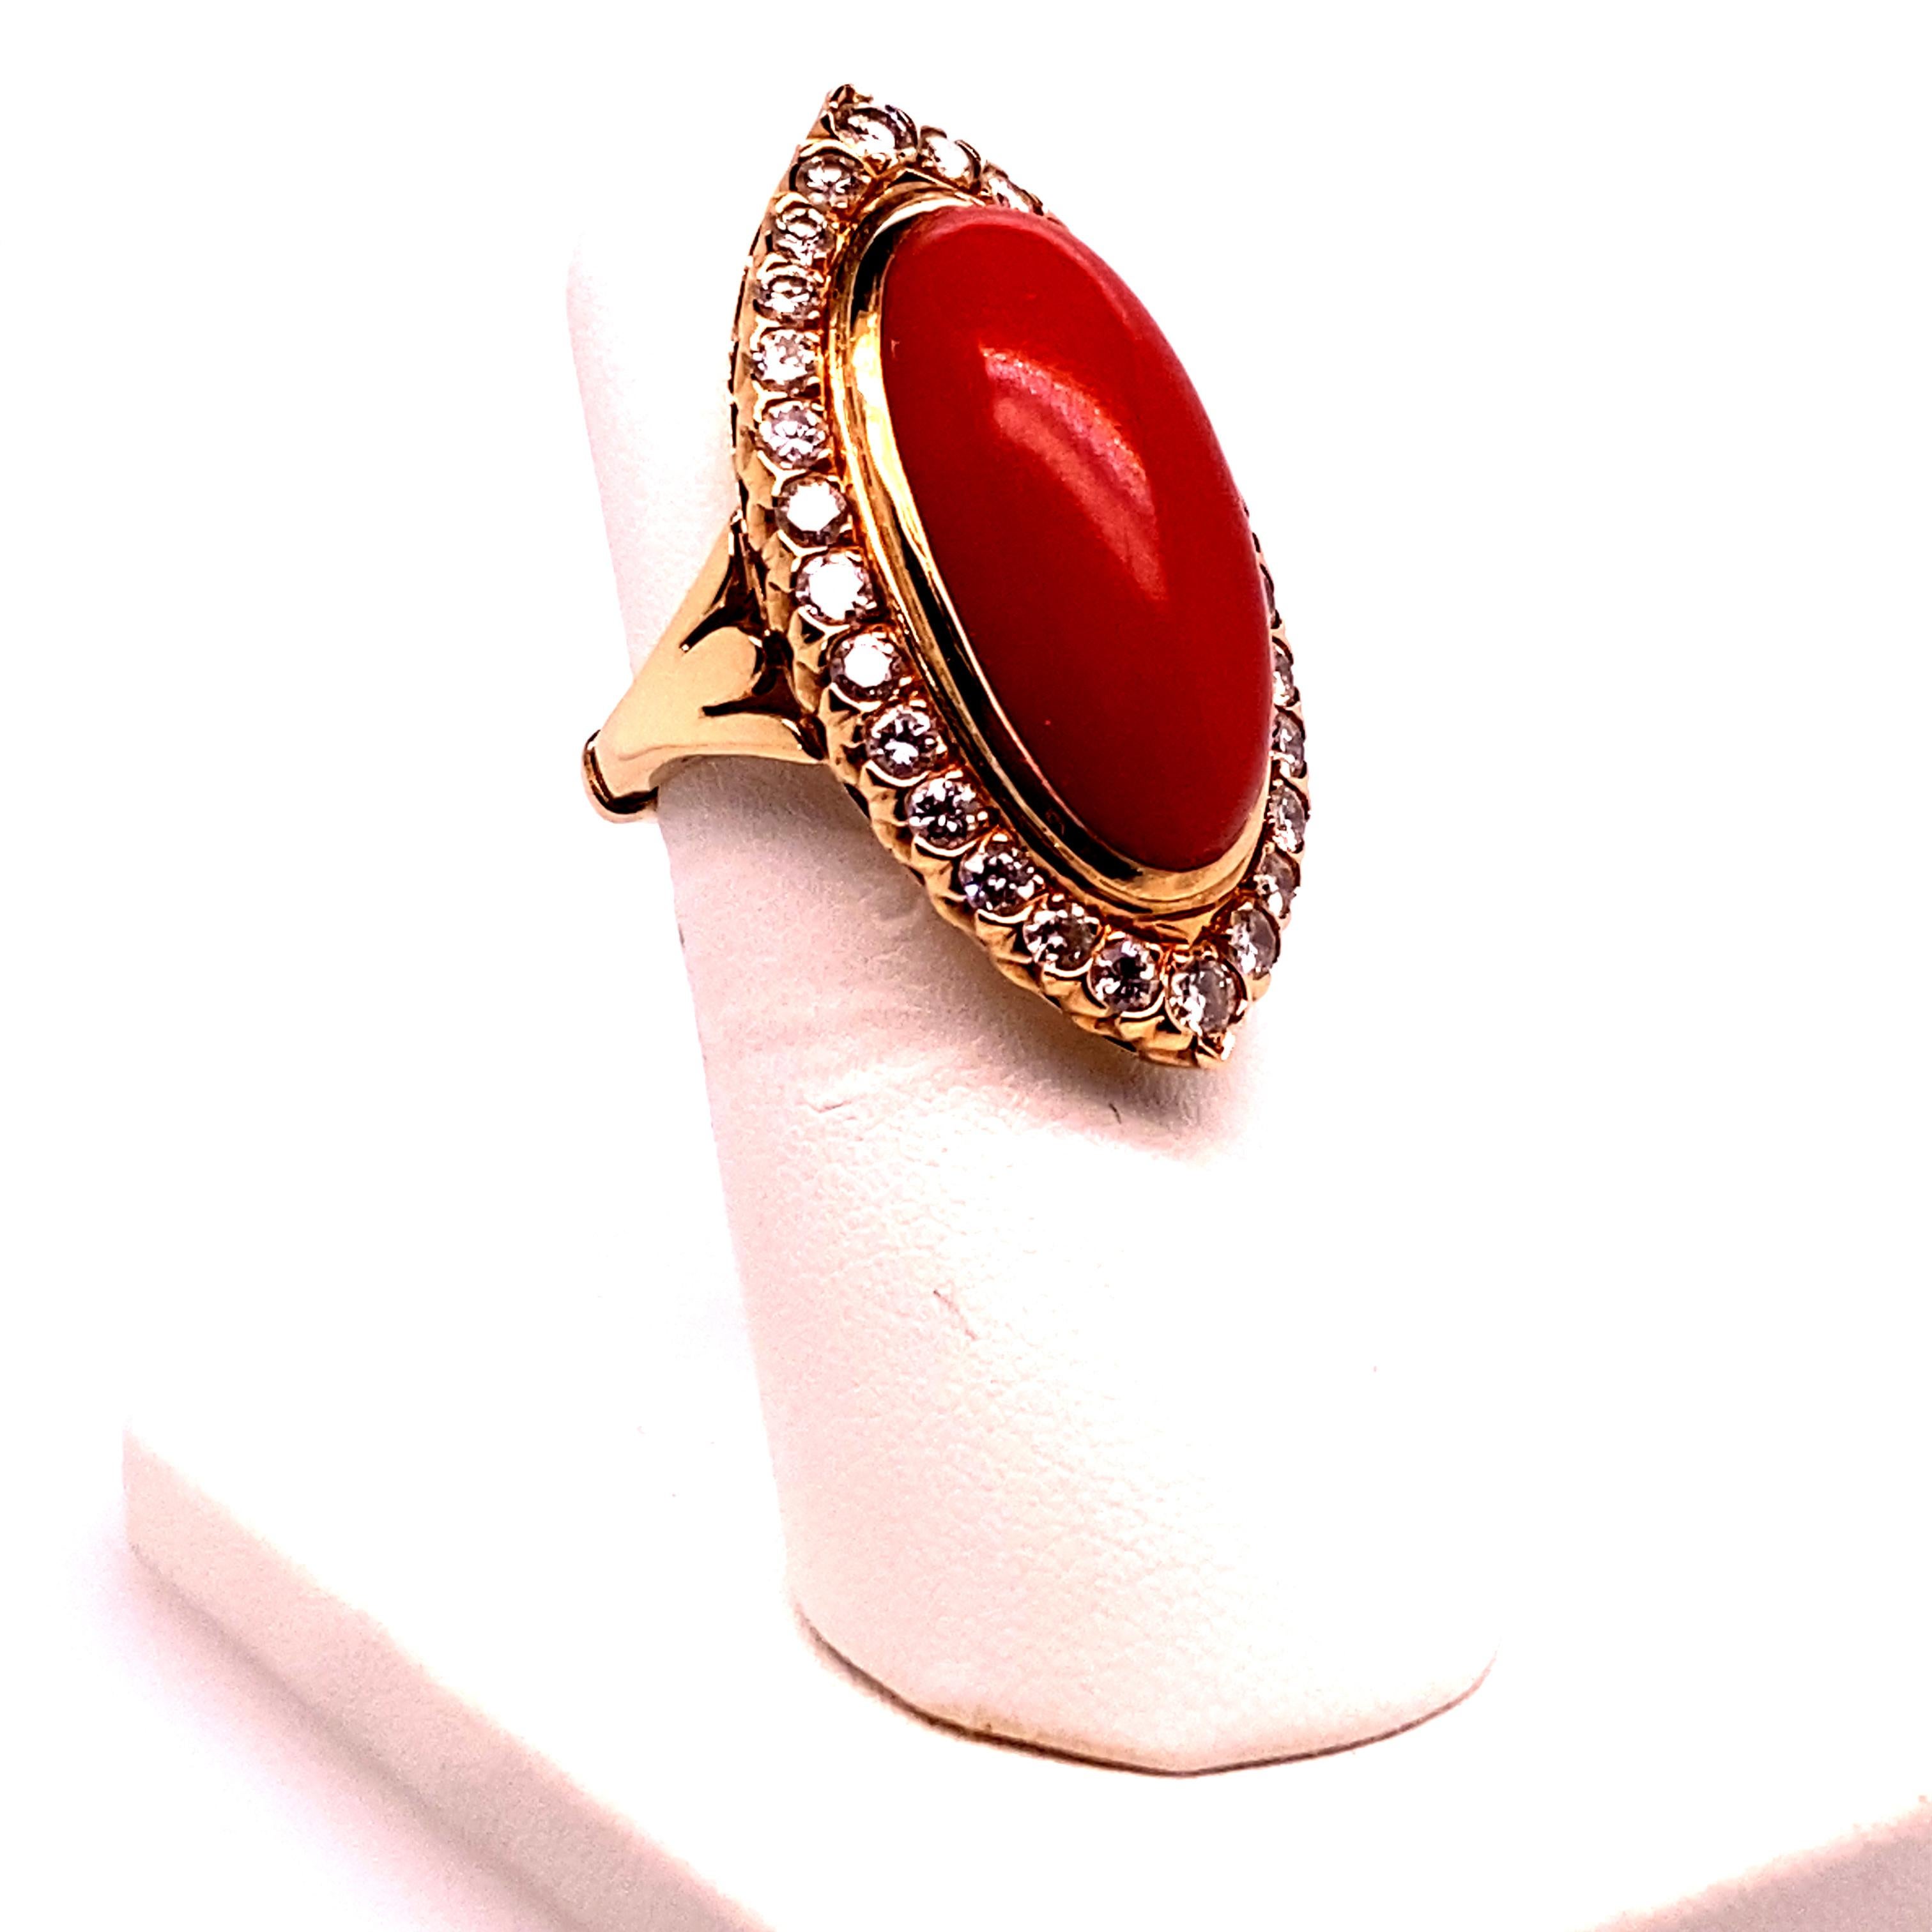 LAST PRICE REDUCTION!  Get this GREAT ring before its GONE!

14kt Yellow gold vintage ring from Italy.  Featuring one oval cut red coral cabachon measuring aproxiamtely 22x12mm and twenty eight round, full cut diamonds weighing aproximate;y 1,50 cts